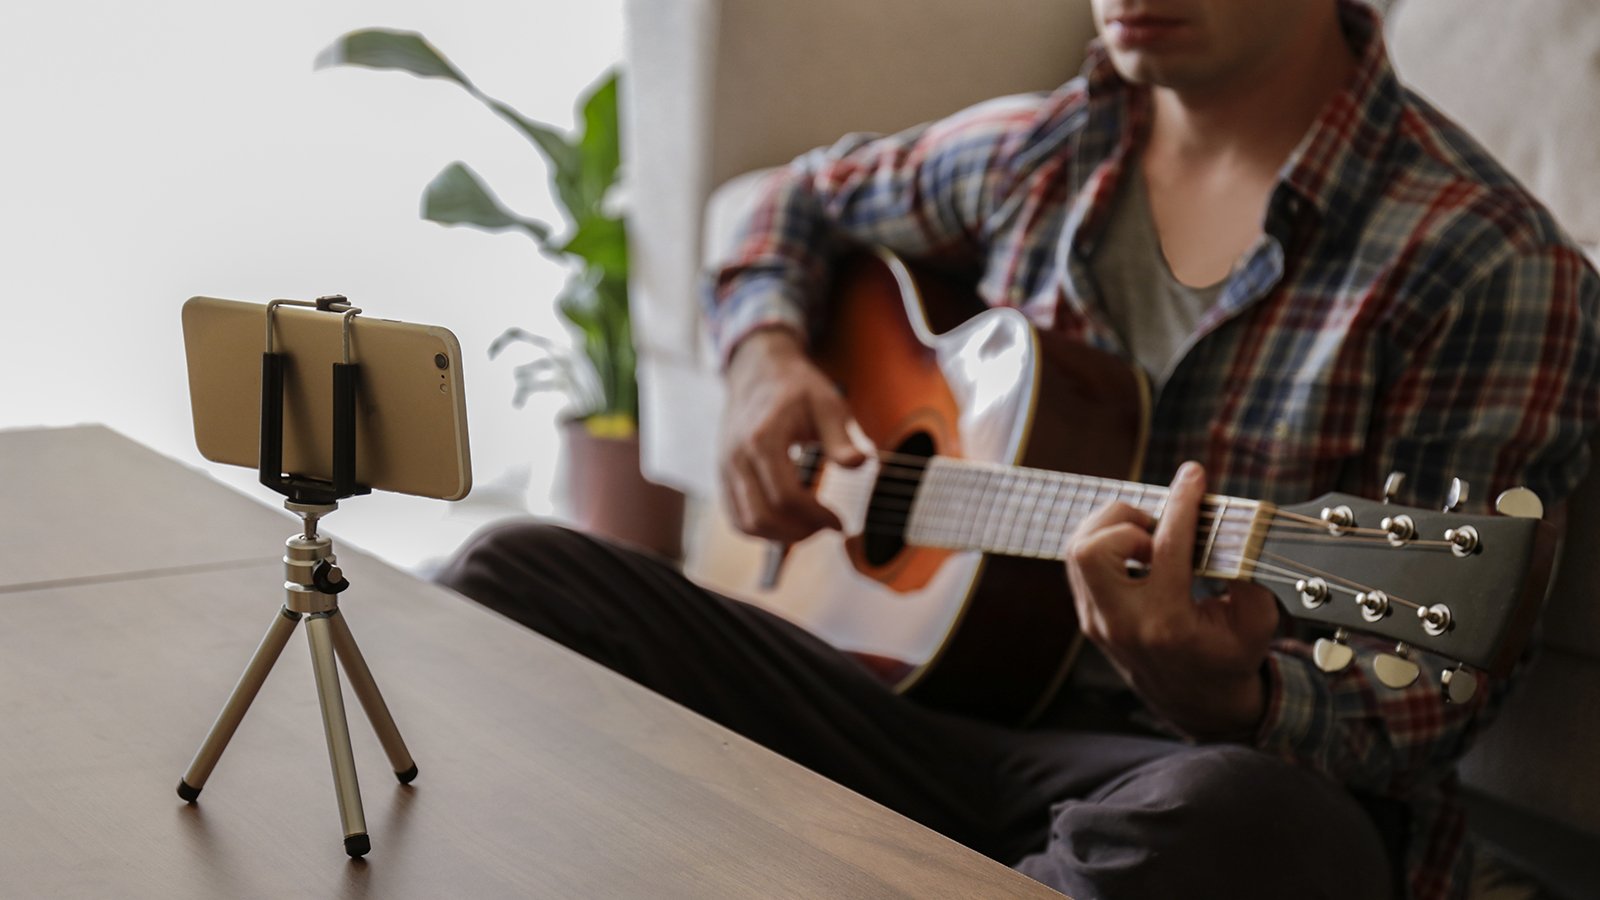 What to Know About Livestreaming Copyrighted Music